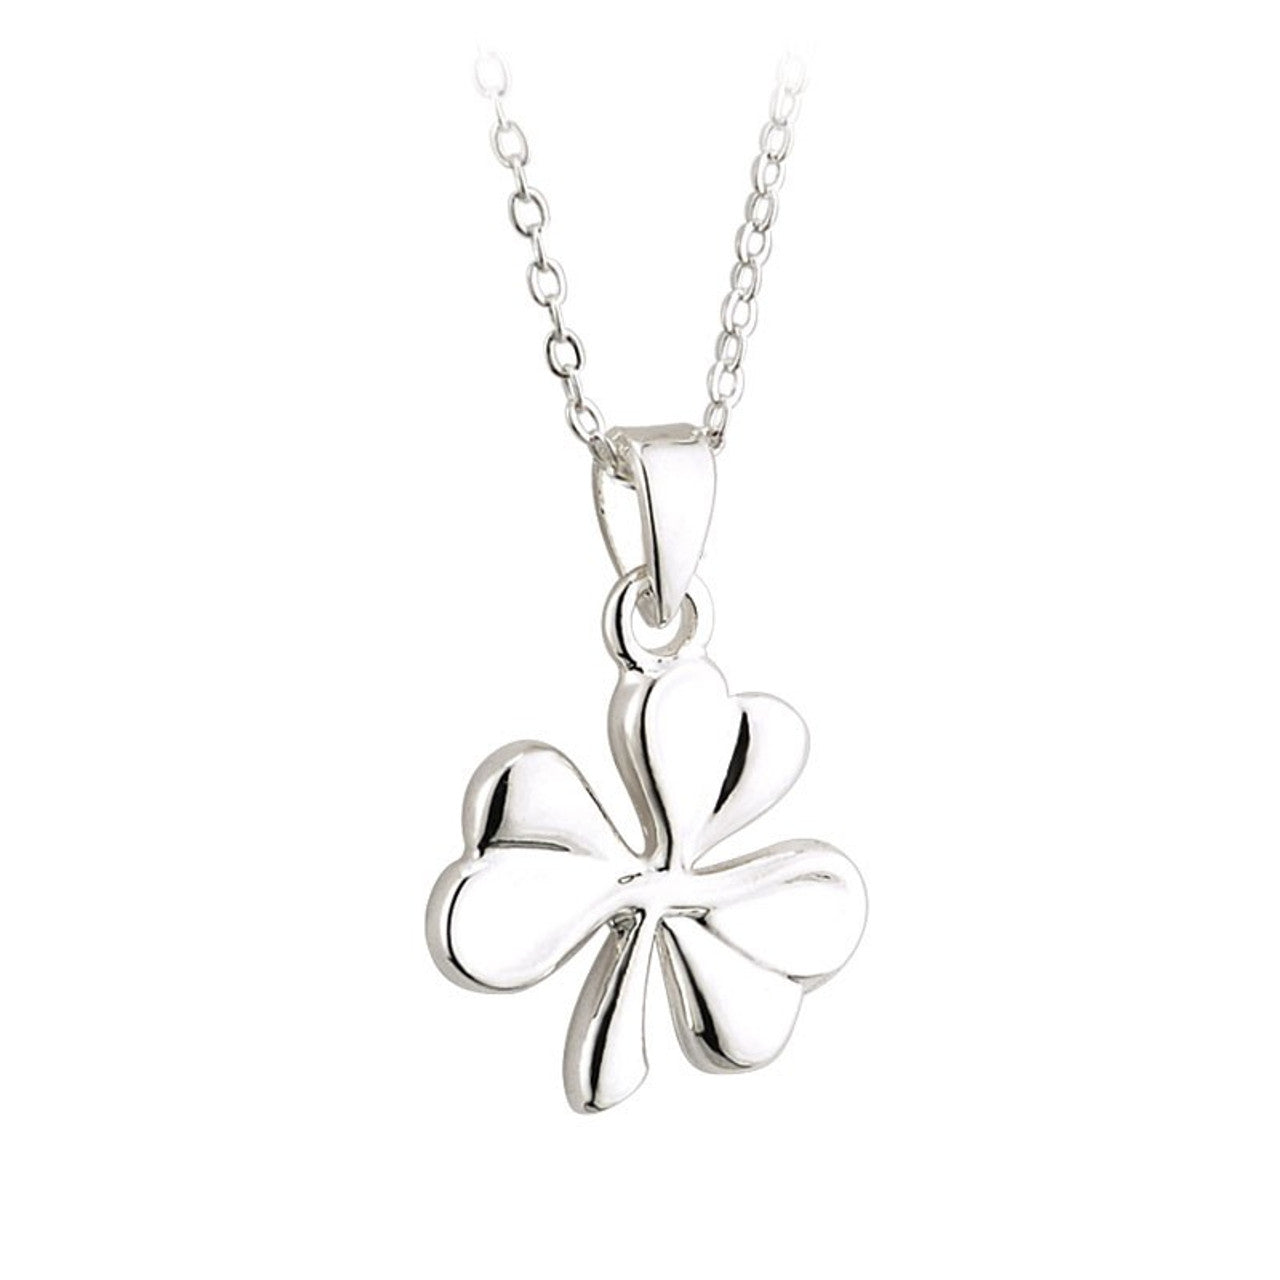 Silver Plated Shamrock Necklace